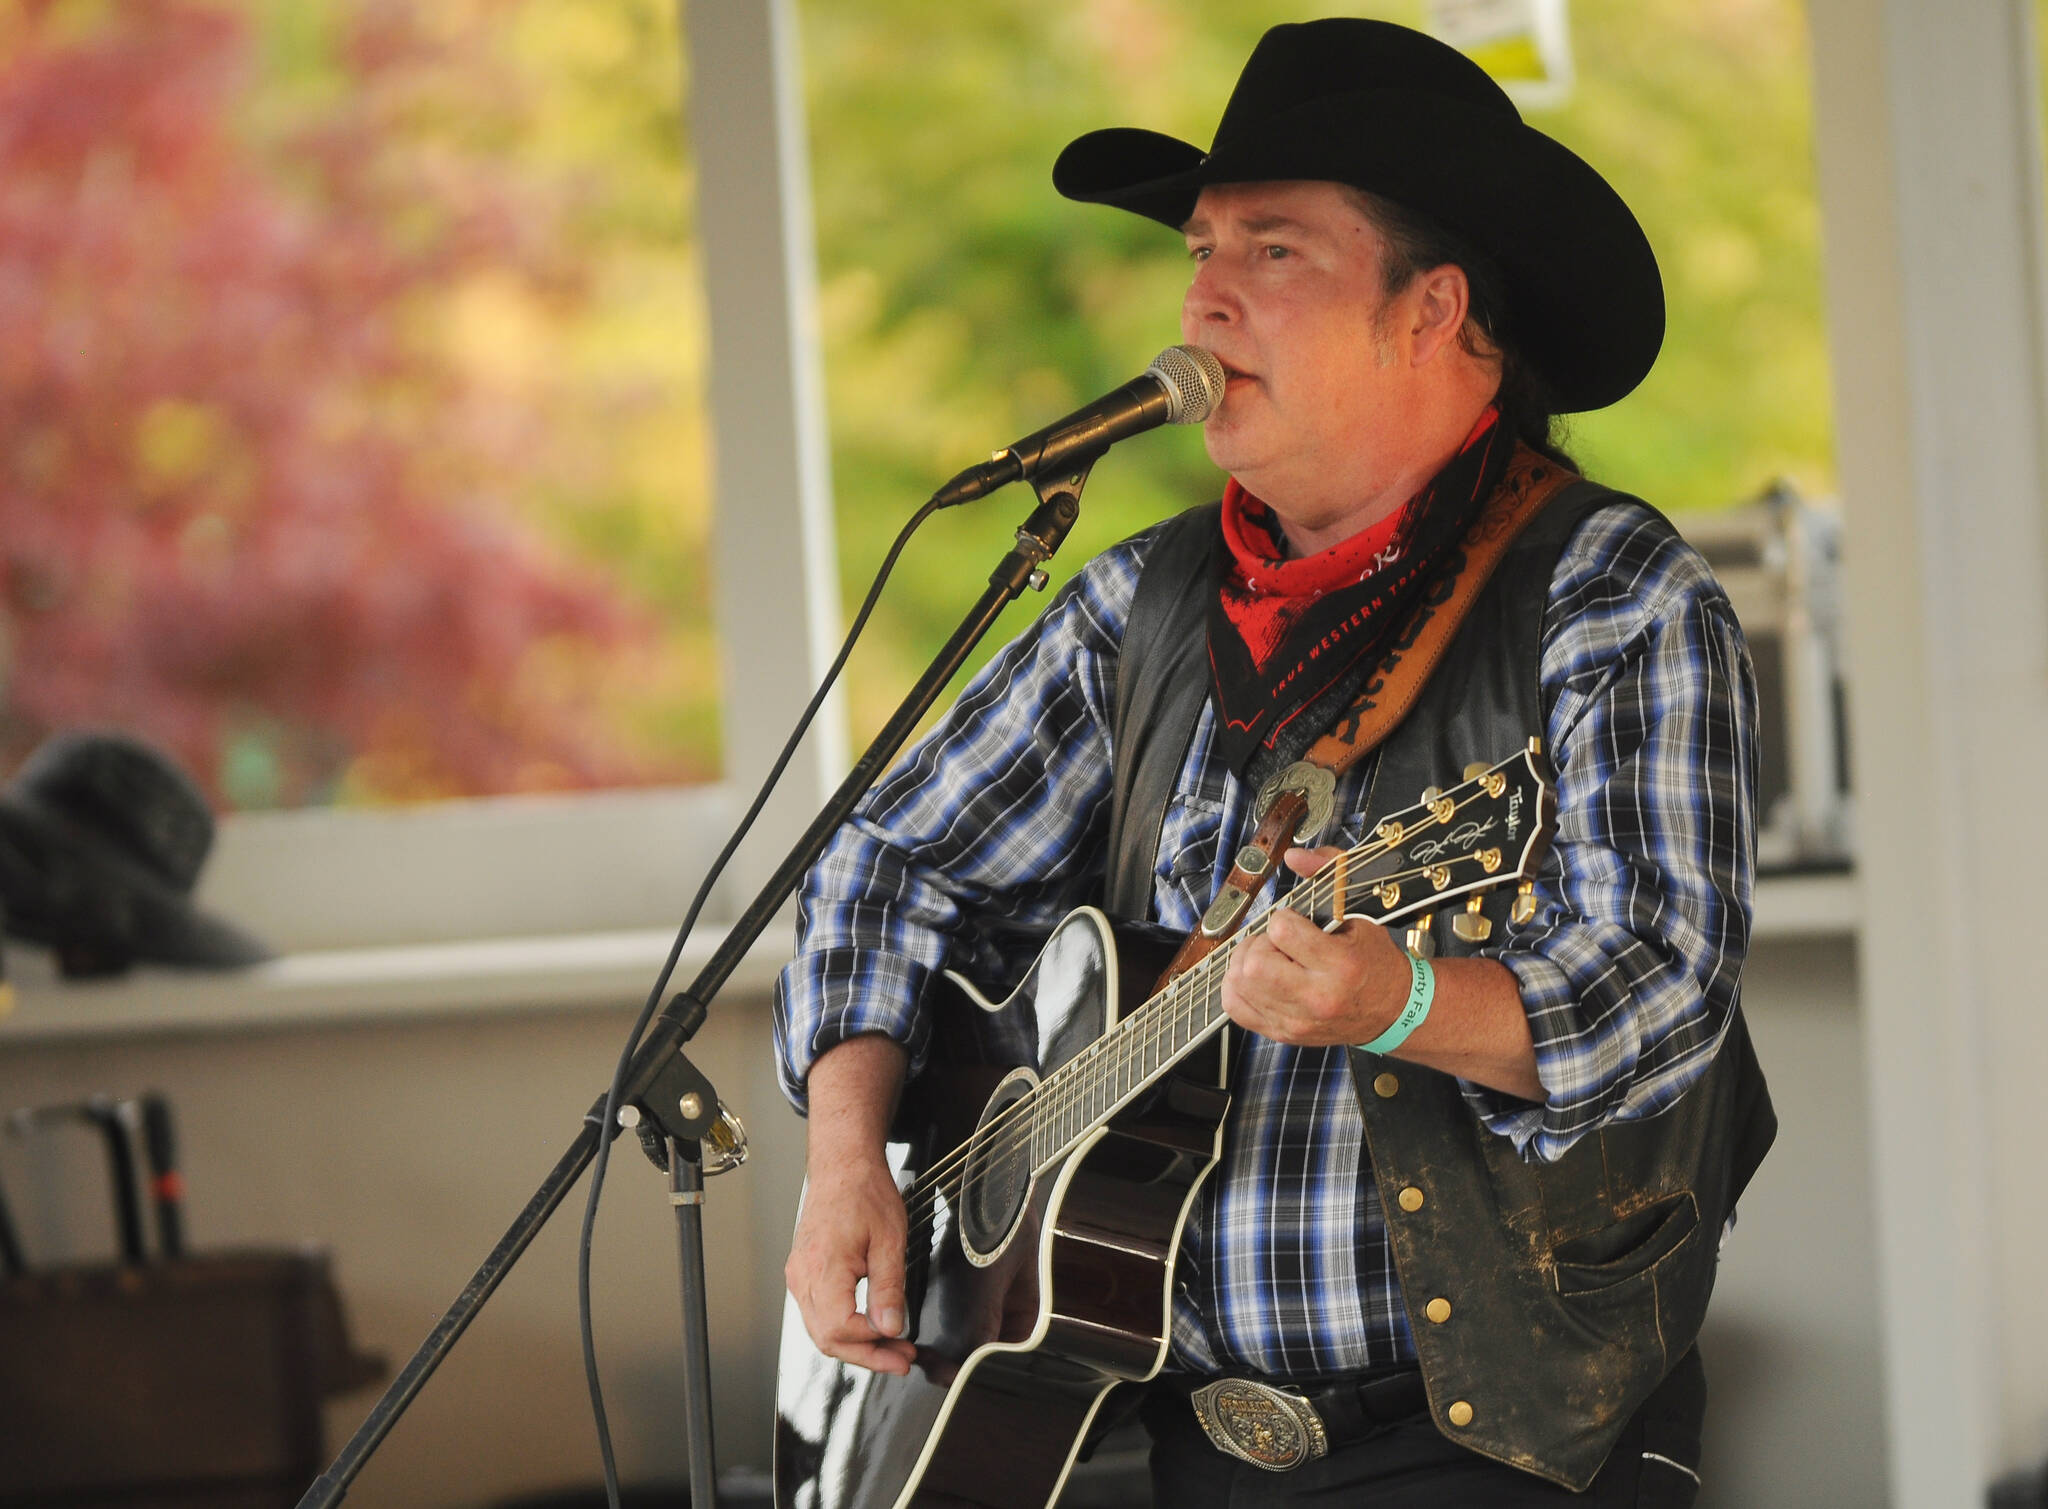 Sequim Gazette file photo by Michael Dashiell
Buck Ellard, pictured here playing for the Clallam County Fair crowd at the Sunny Farms Stage in August, is one of several acts hitting the stage for the first Soupstock event, a fundraiser for the Sequim Food Bank, on Nov. 11.